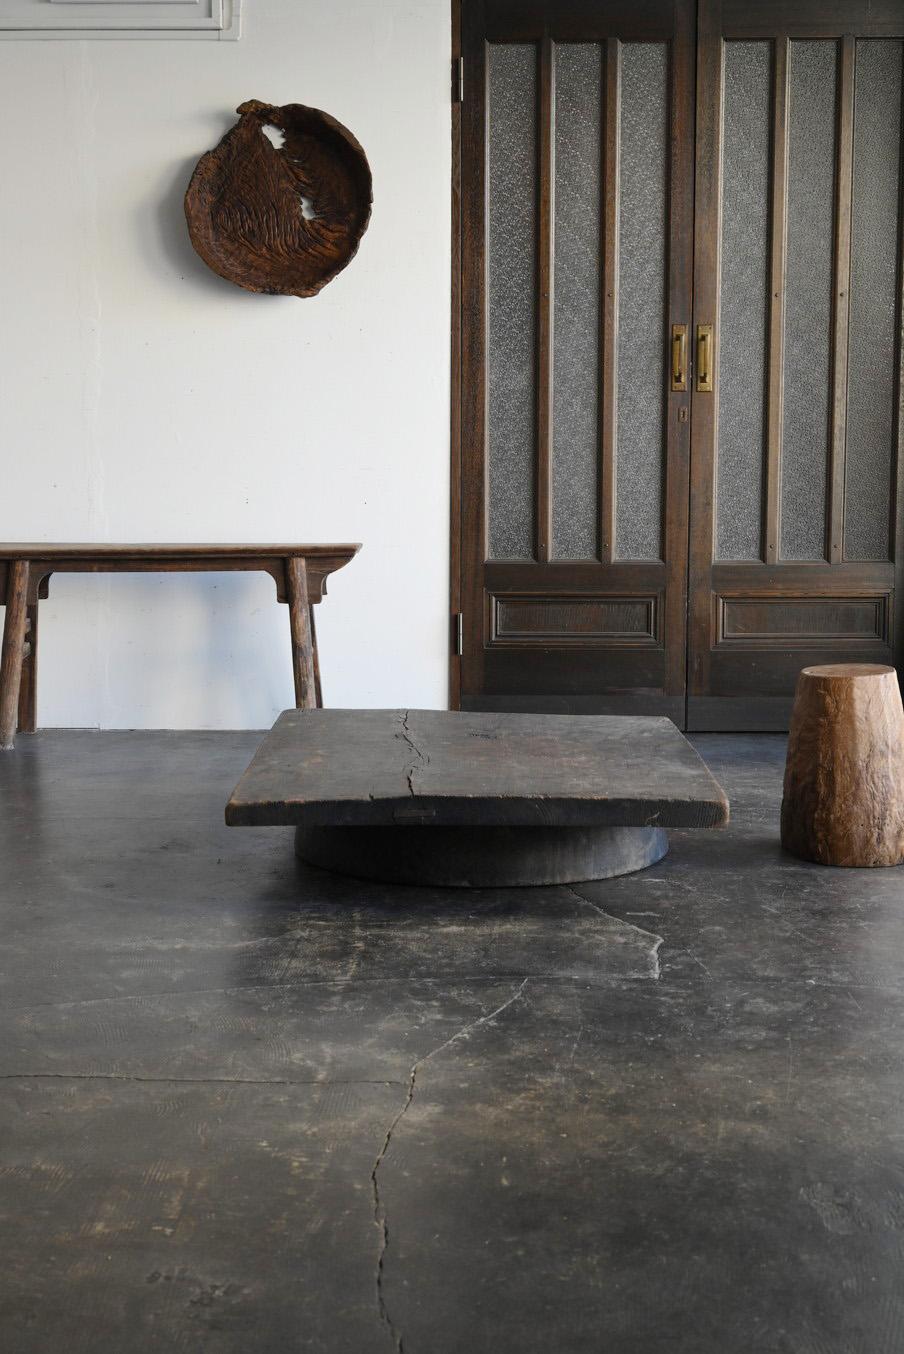 I would like to introduce you to a nice low table that gives you a very wabi-sabi feeling.
This low table is a combination of wooden boards made from the Meiji period to the Taisho period and wooden bowls used by lacquer craftsmen made from the